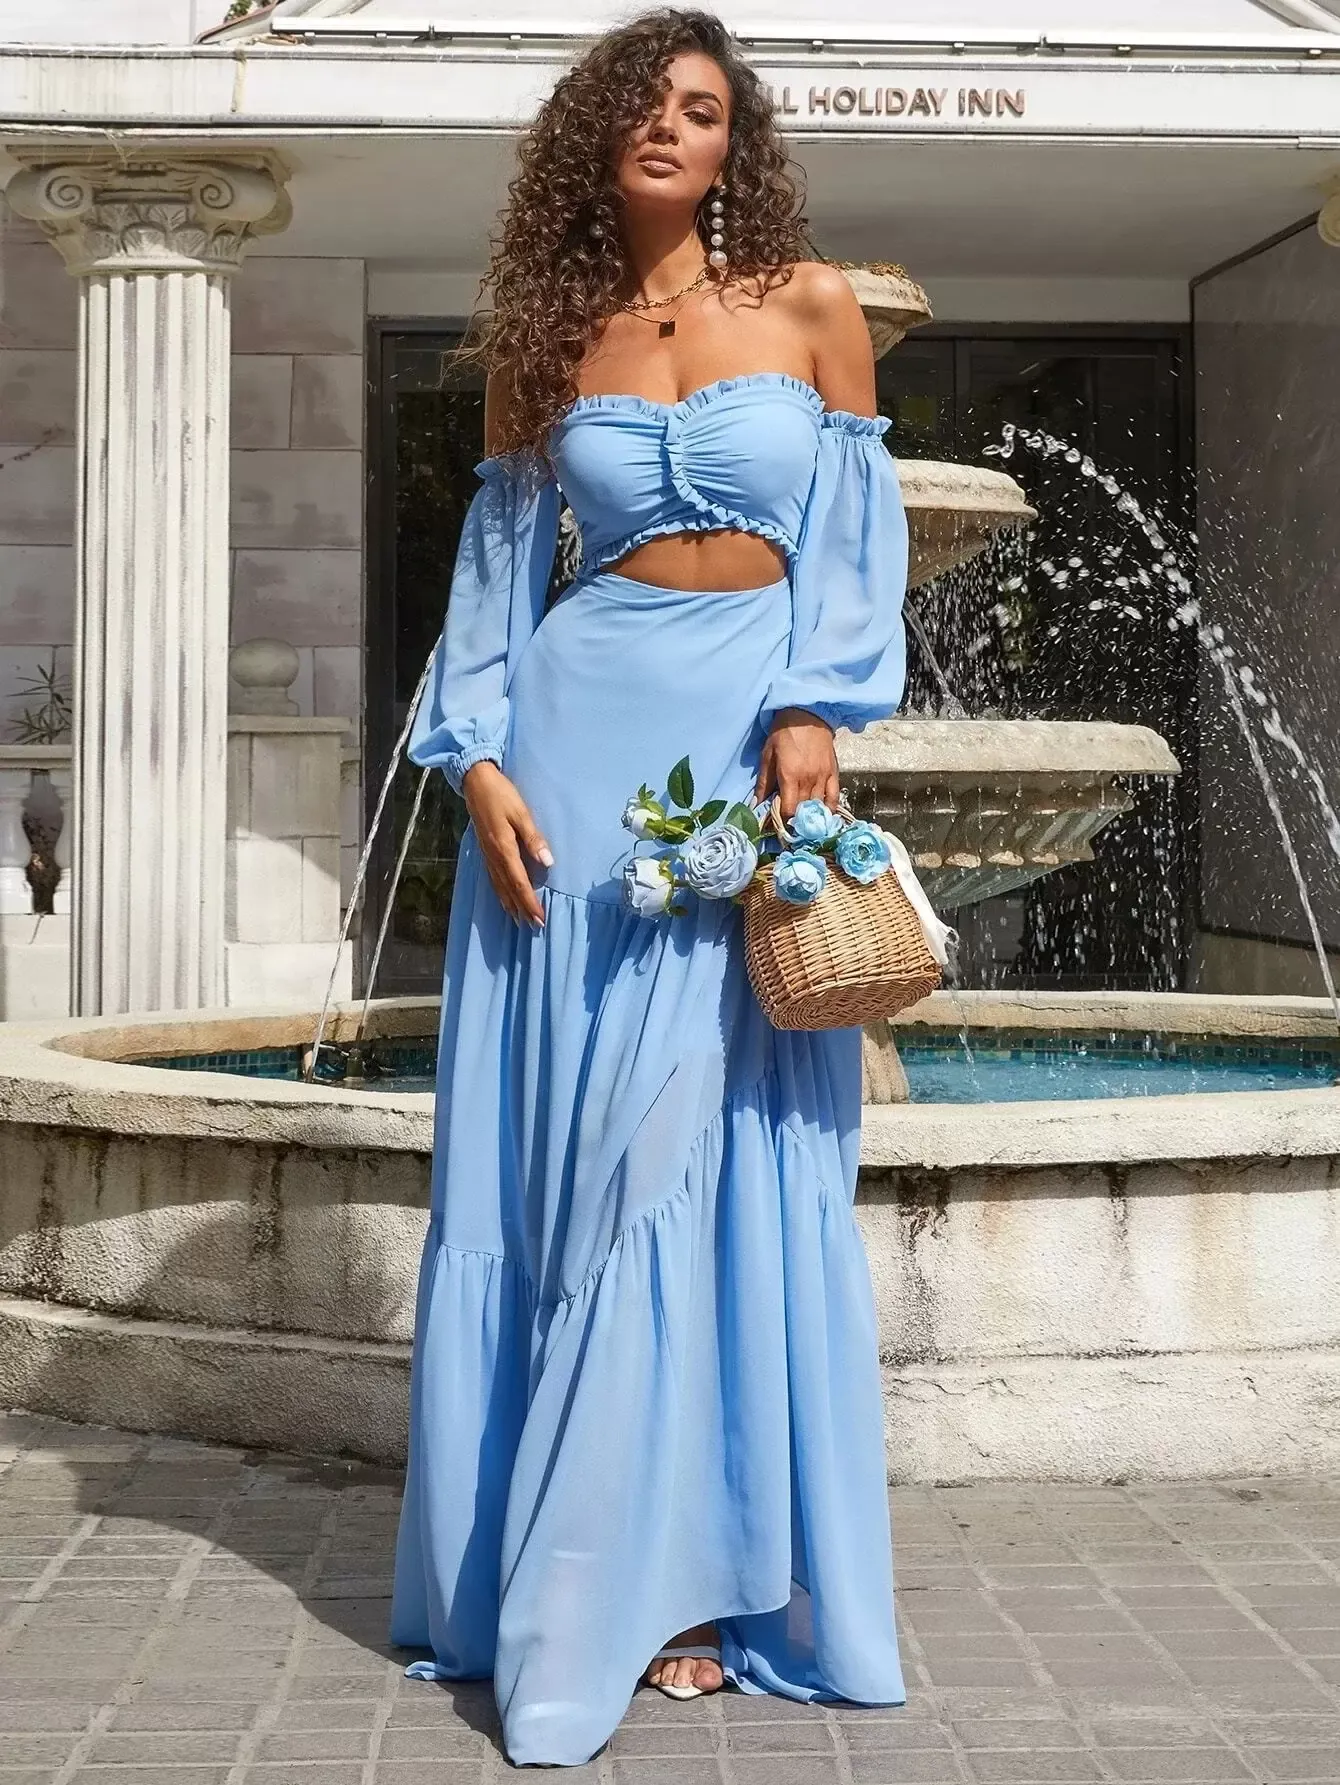 Sexy A-line Light Blue Chiffon Bridesmaid Dresses Long Sleeves Off Shoulder Sweetheart Floor Length Backless Wedding Guest Party Gowns for Nigerian Weddings